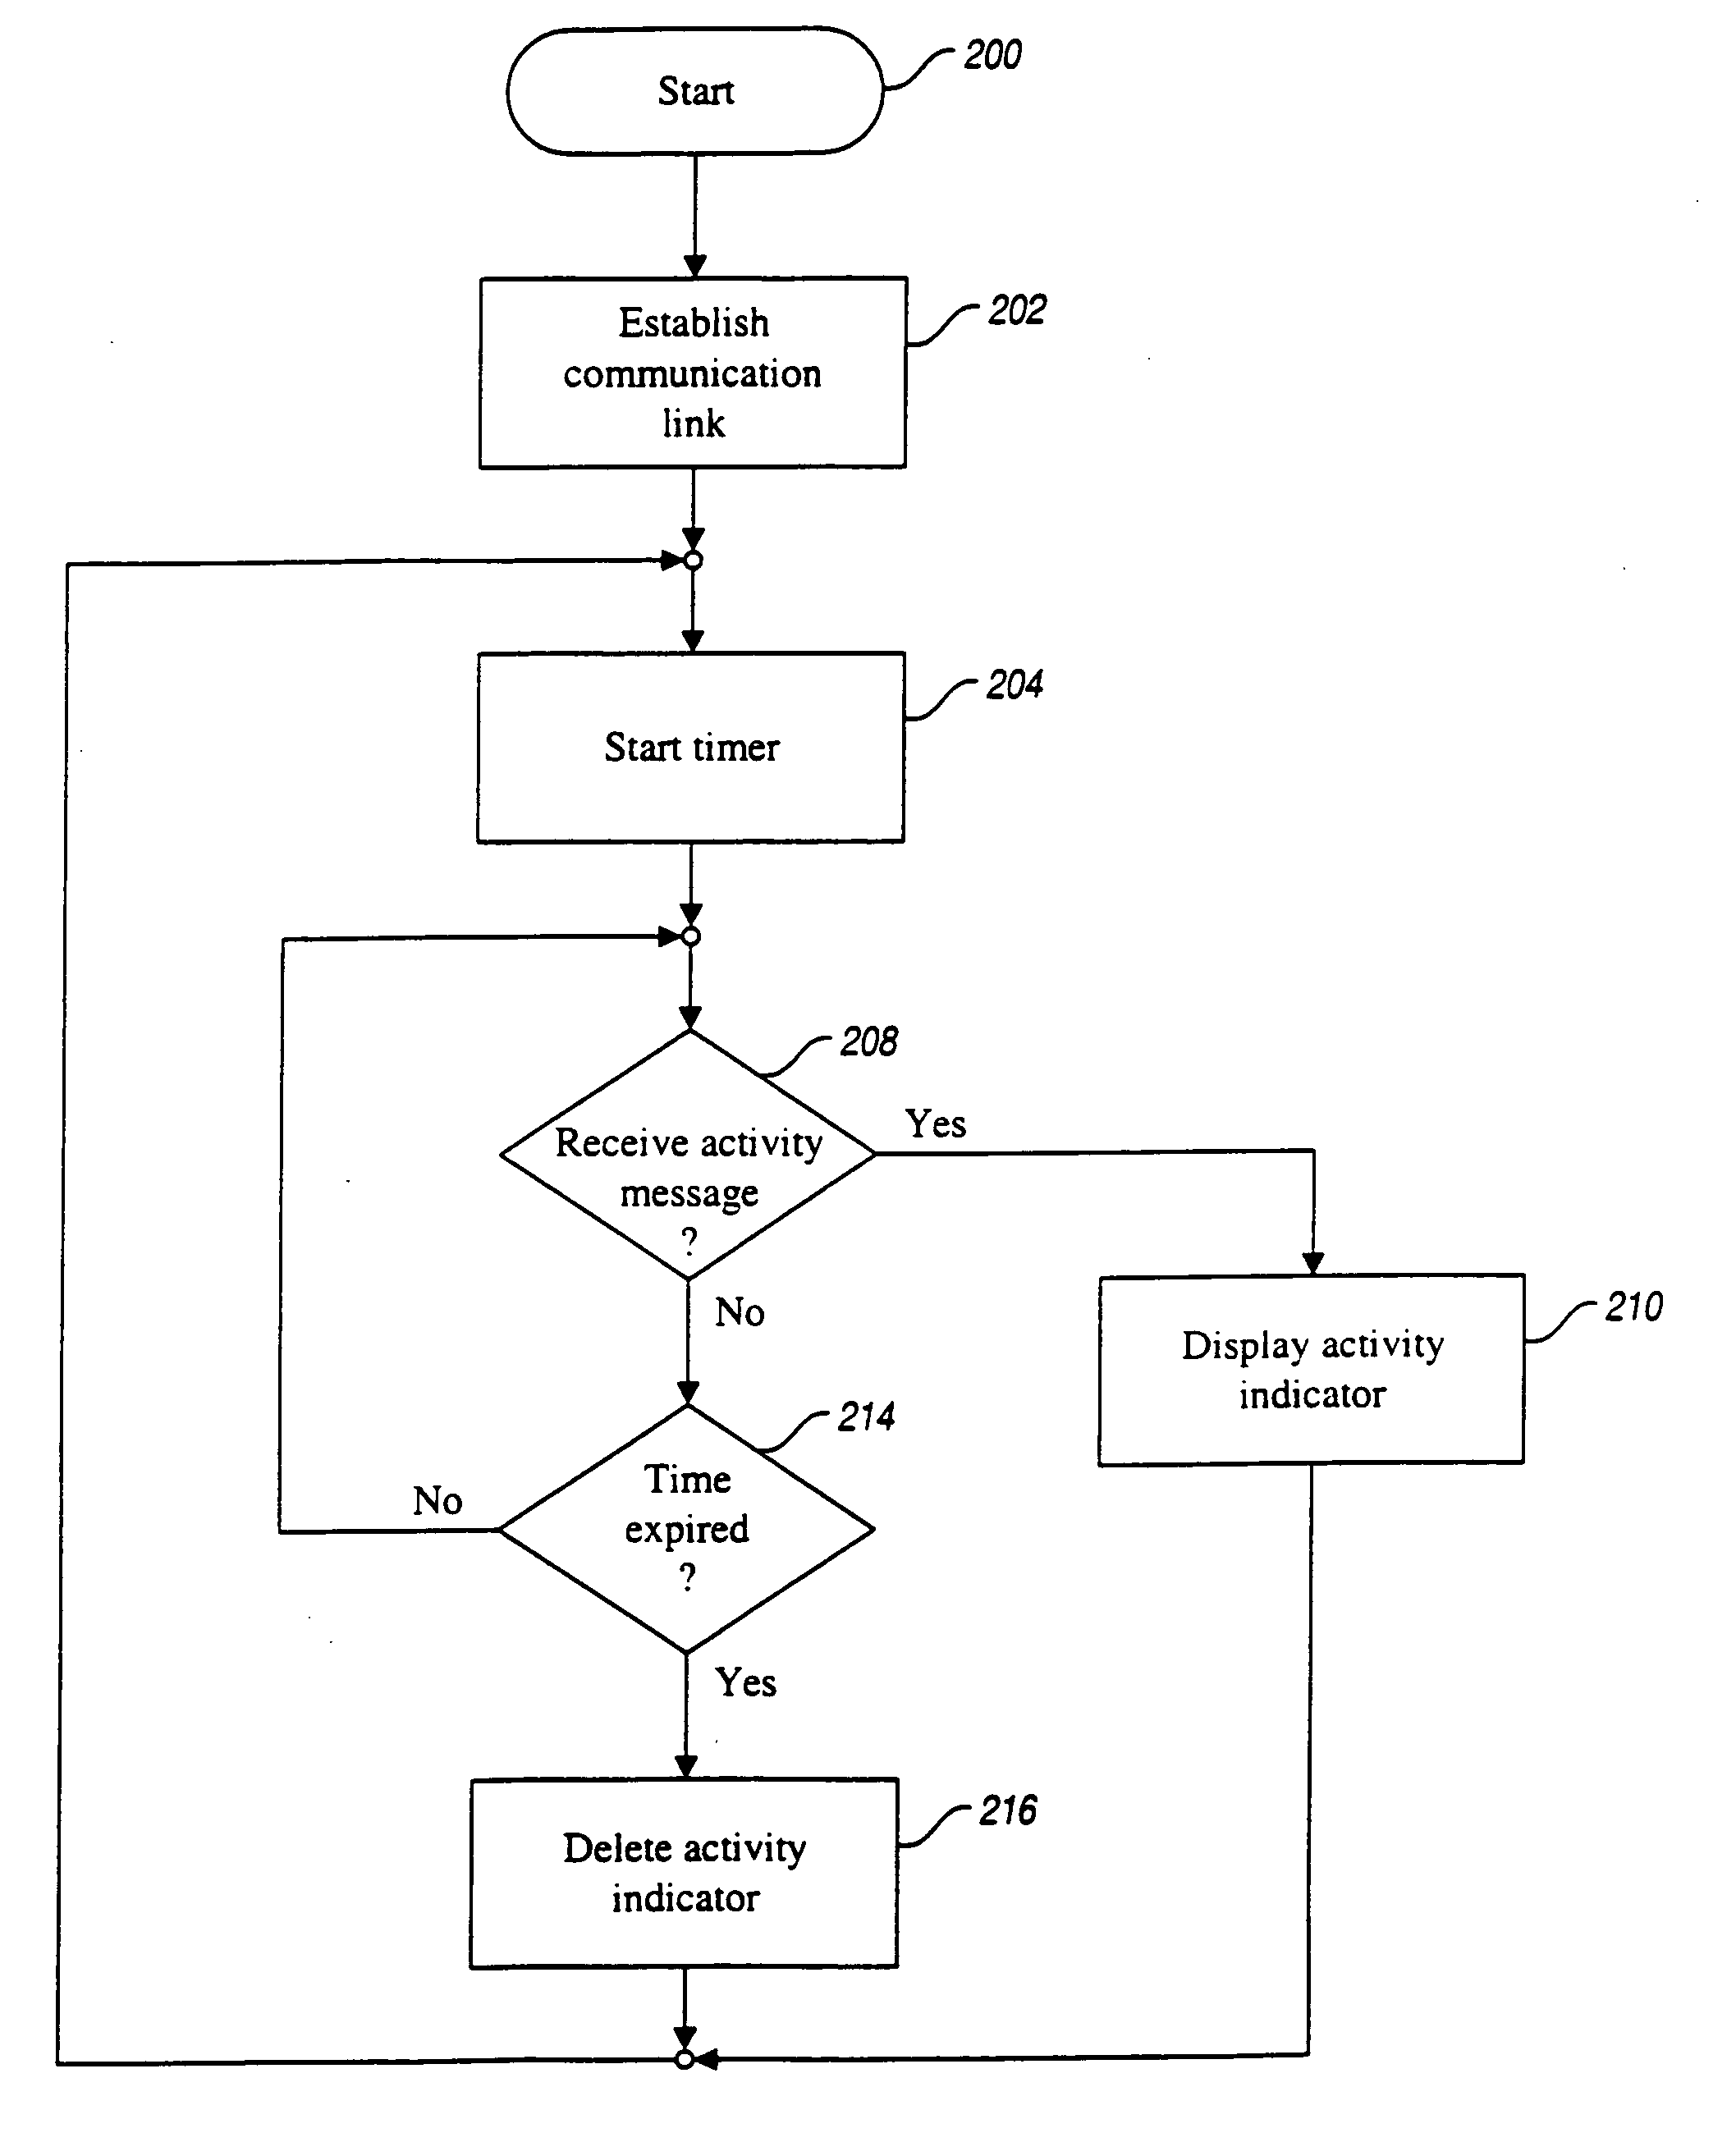 System and method for activity monitoring and reporting in a computer network